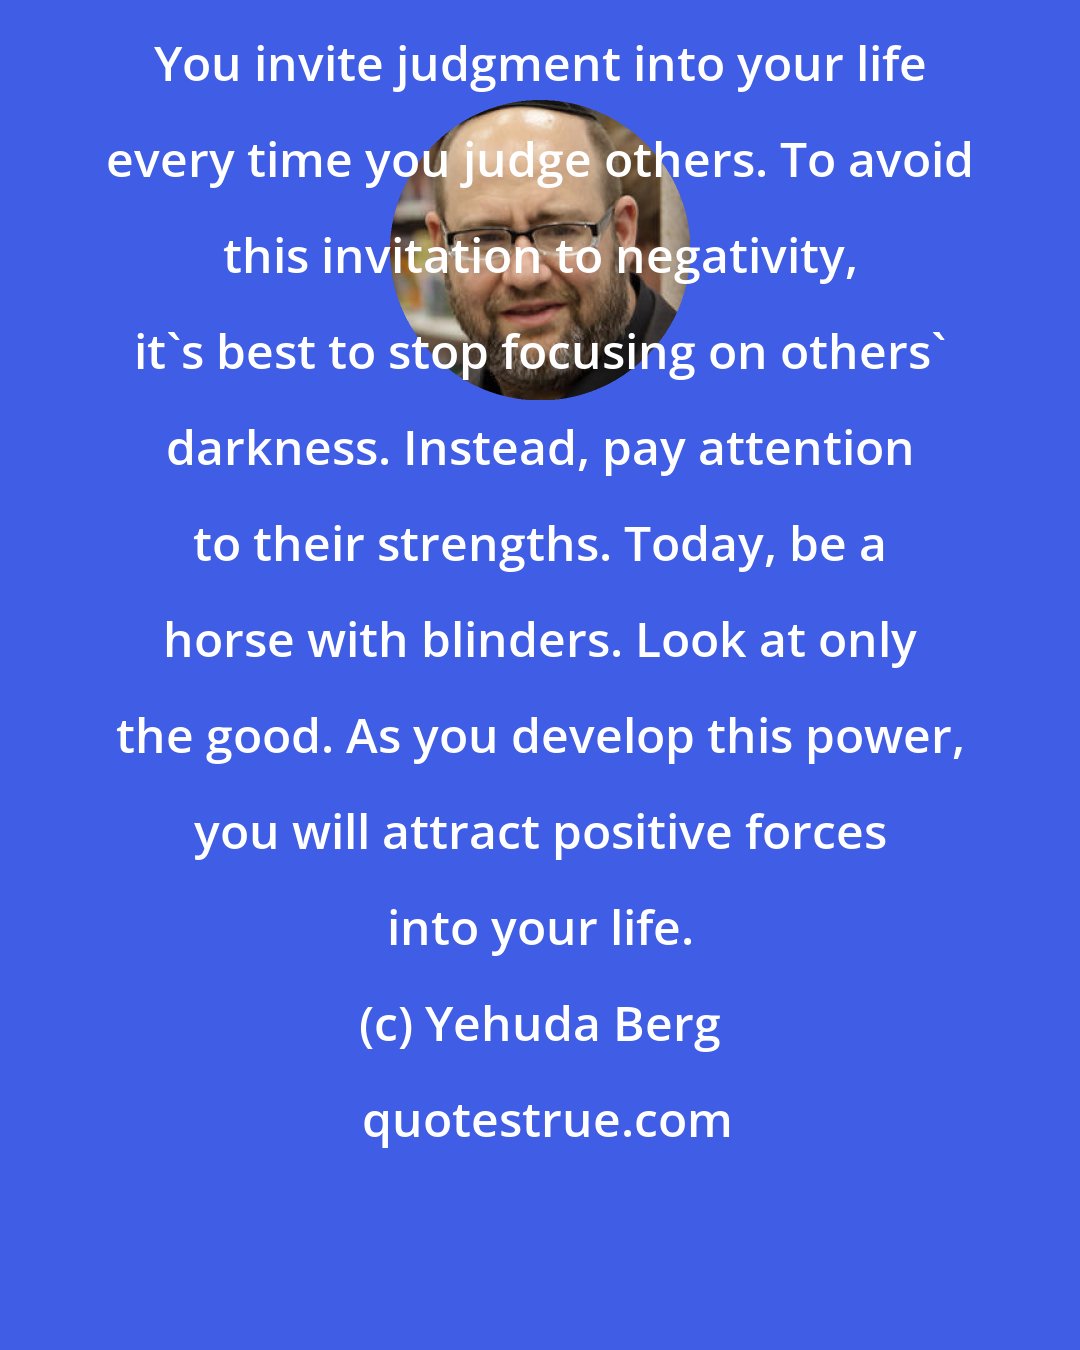 Yehuda Berg: You invite judgment into your life every time you judge others. To avoid this invitation to negativity, it's best to stop focusing on others' darkness. Instead, pay attention to their strengths. Today, be a horse with blinders. Look at only the good. As you develop this power, you will attract positive forces into your life.